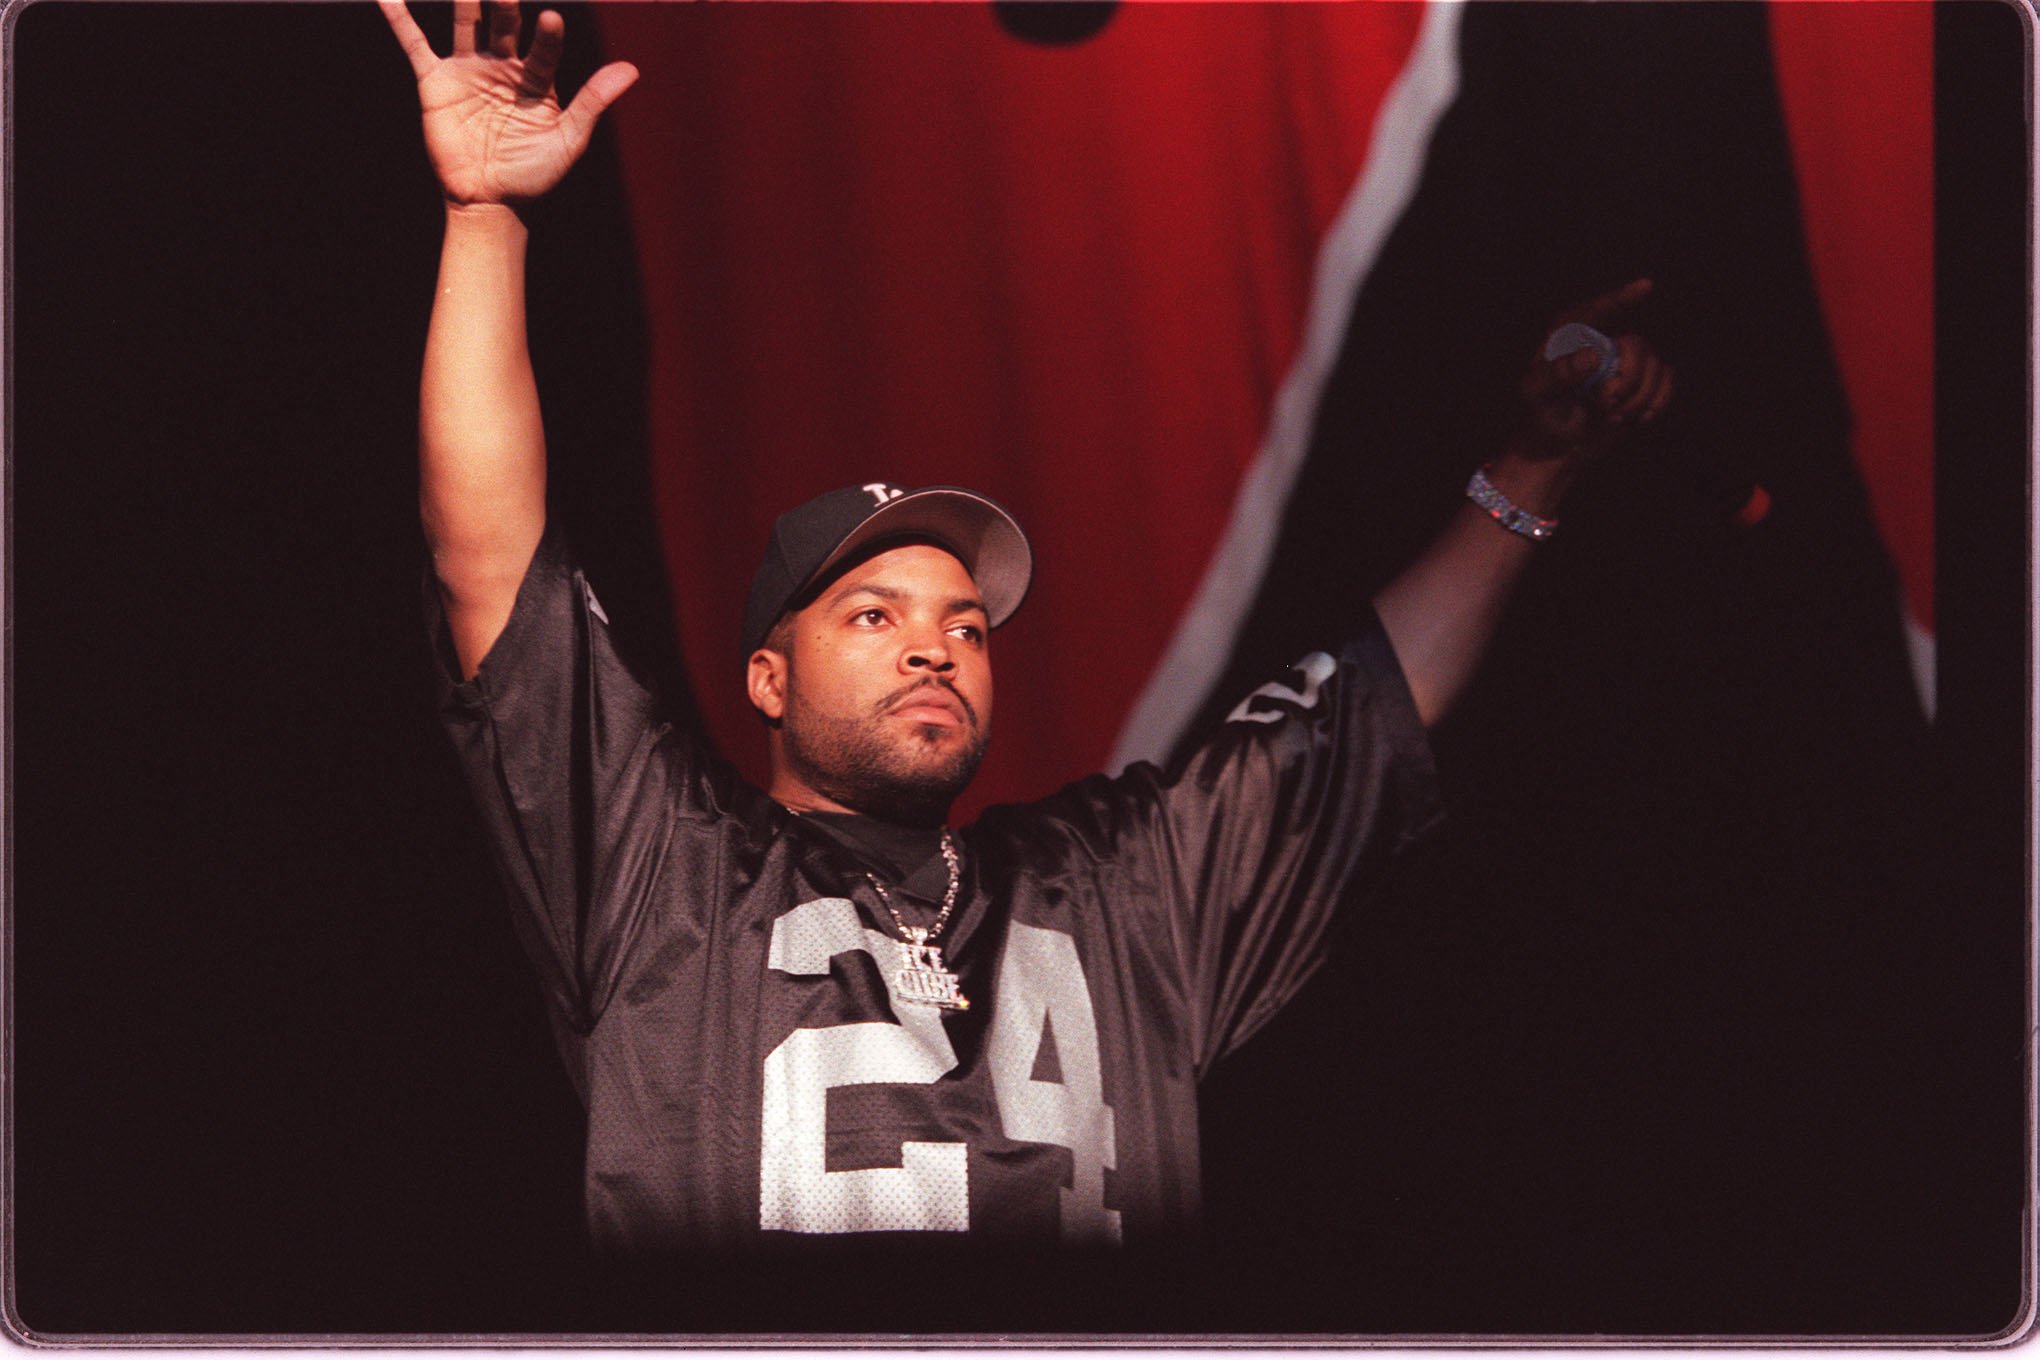 Ice Cube with his hands raised